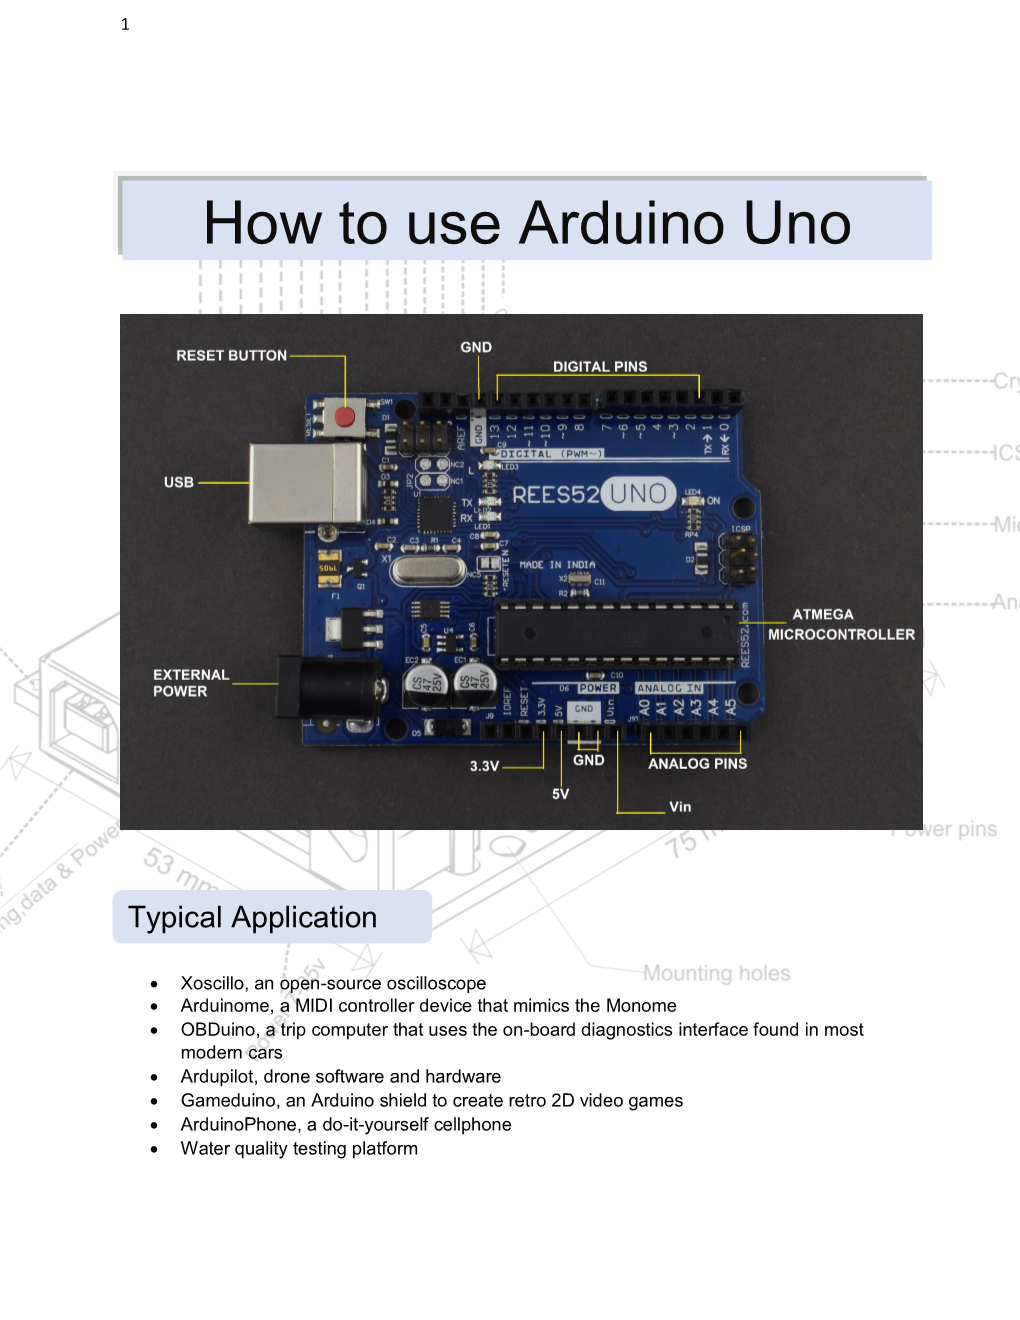 How to Use Arduino Uno